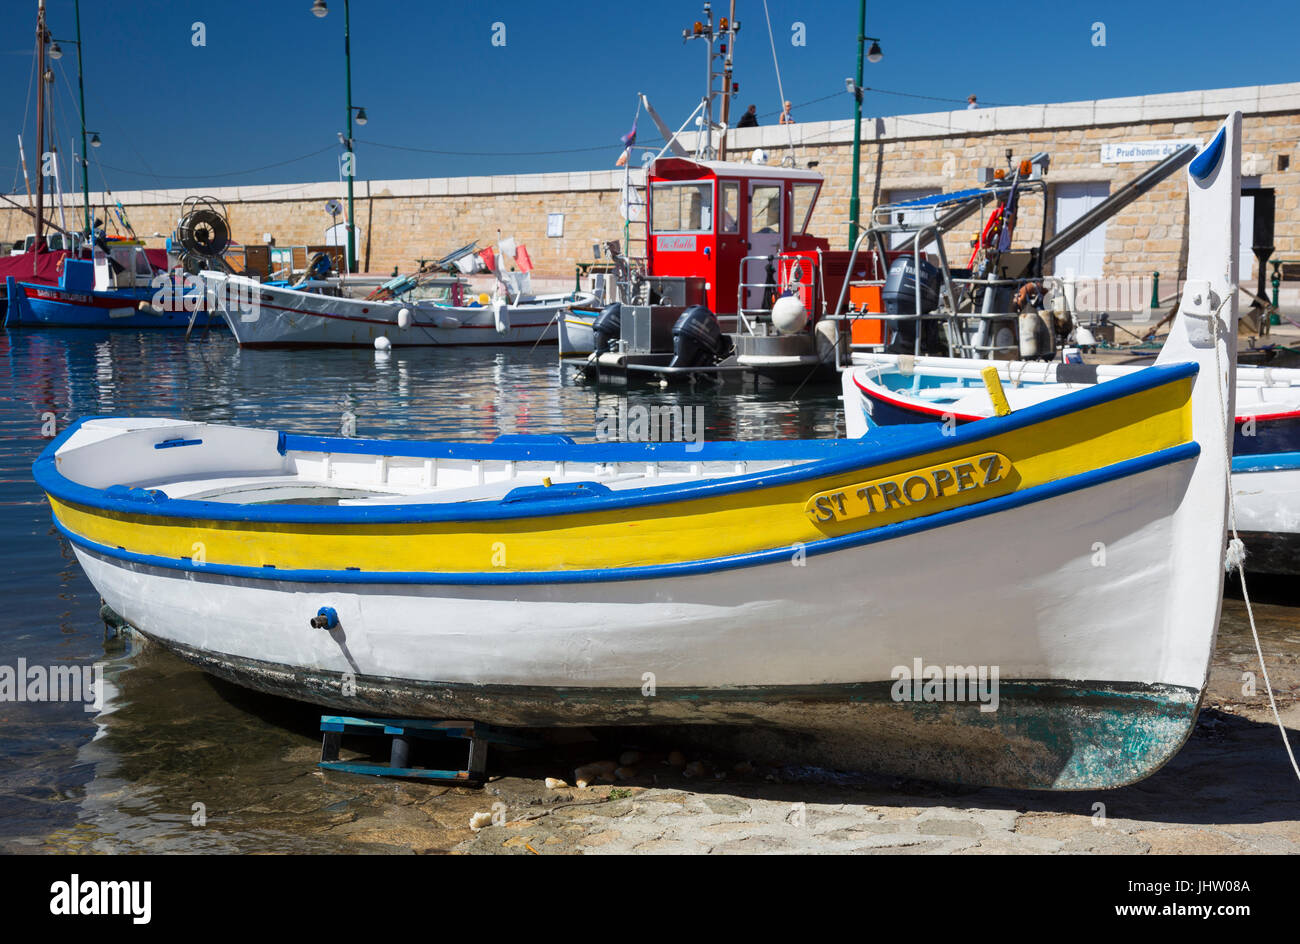 Brightly coloured wooden fishing boat at Saint-Tropez, France. Stock Photo